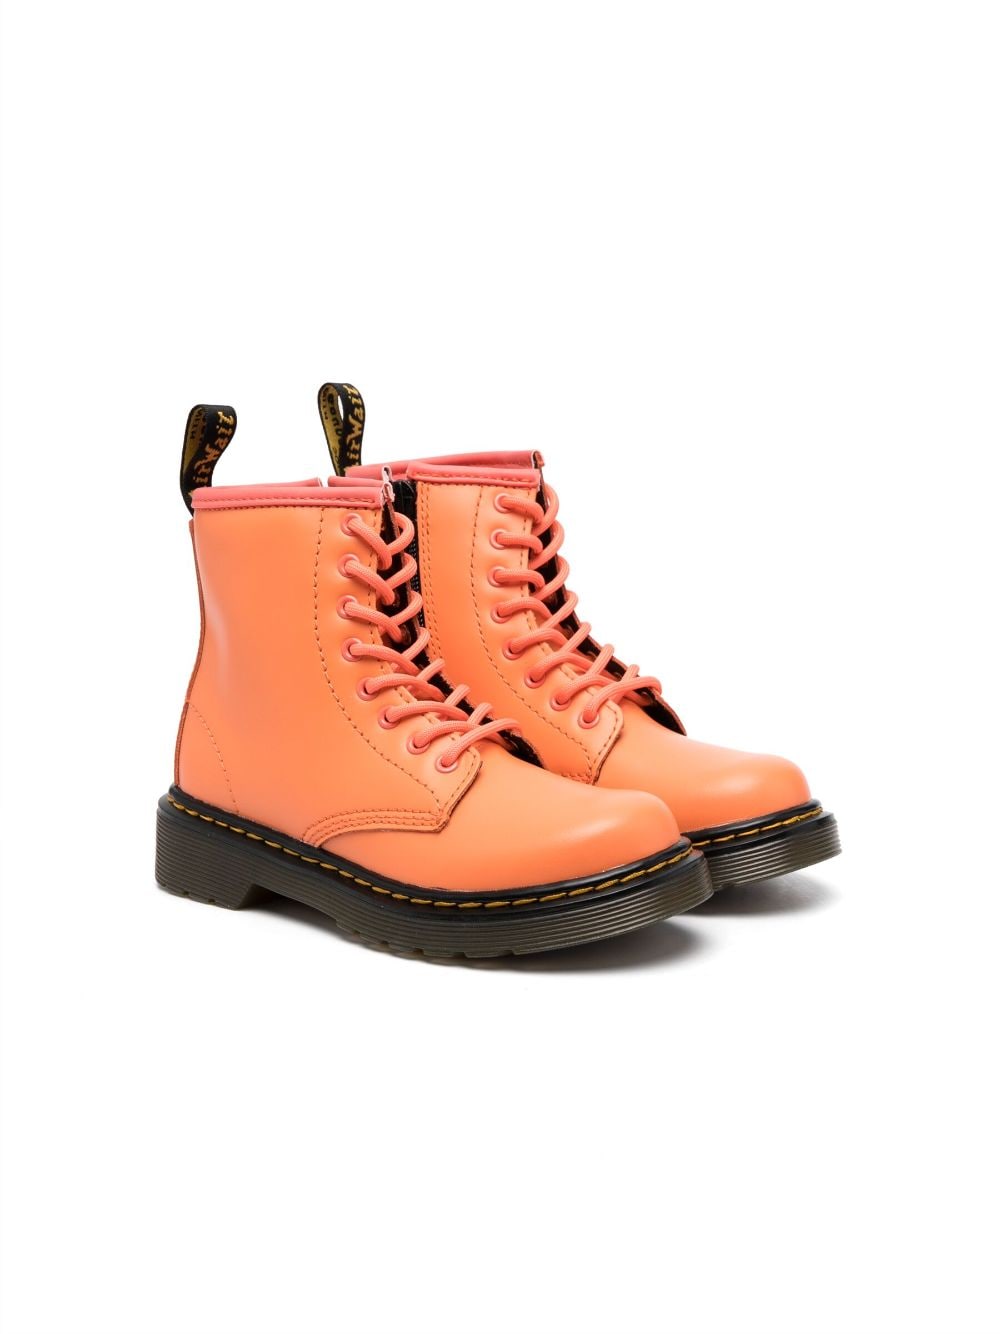 Dr. Martens Kids' 1460 Leather Lace-up Boots In Coral